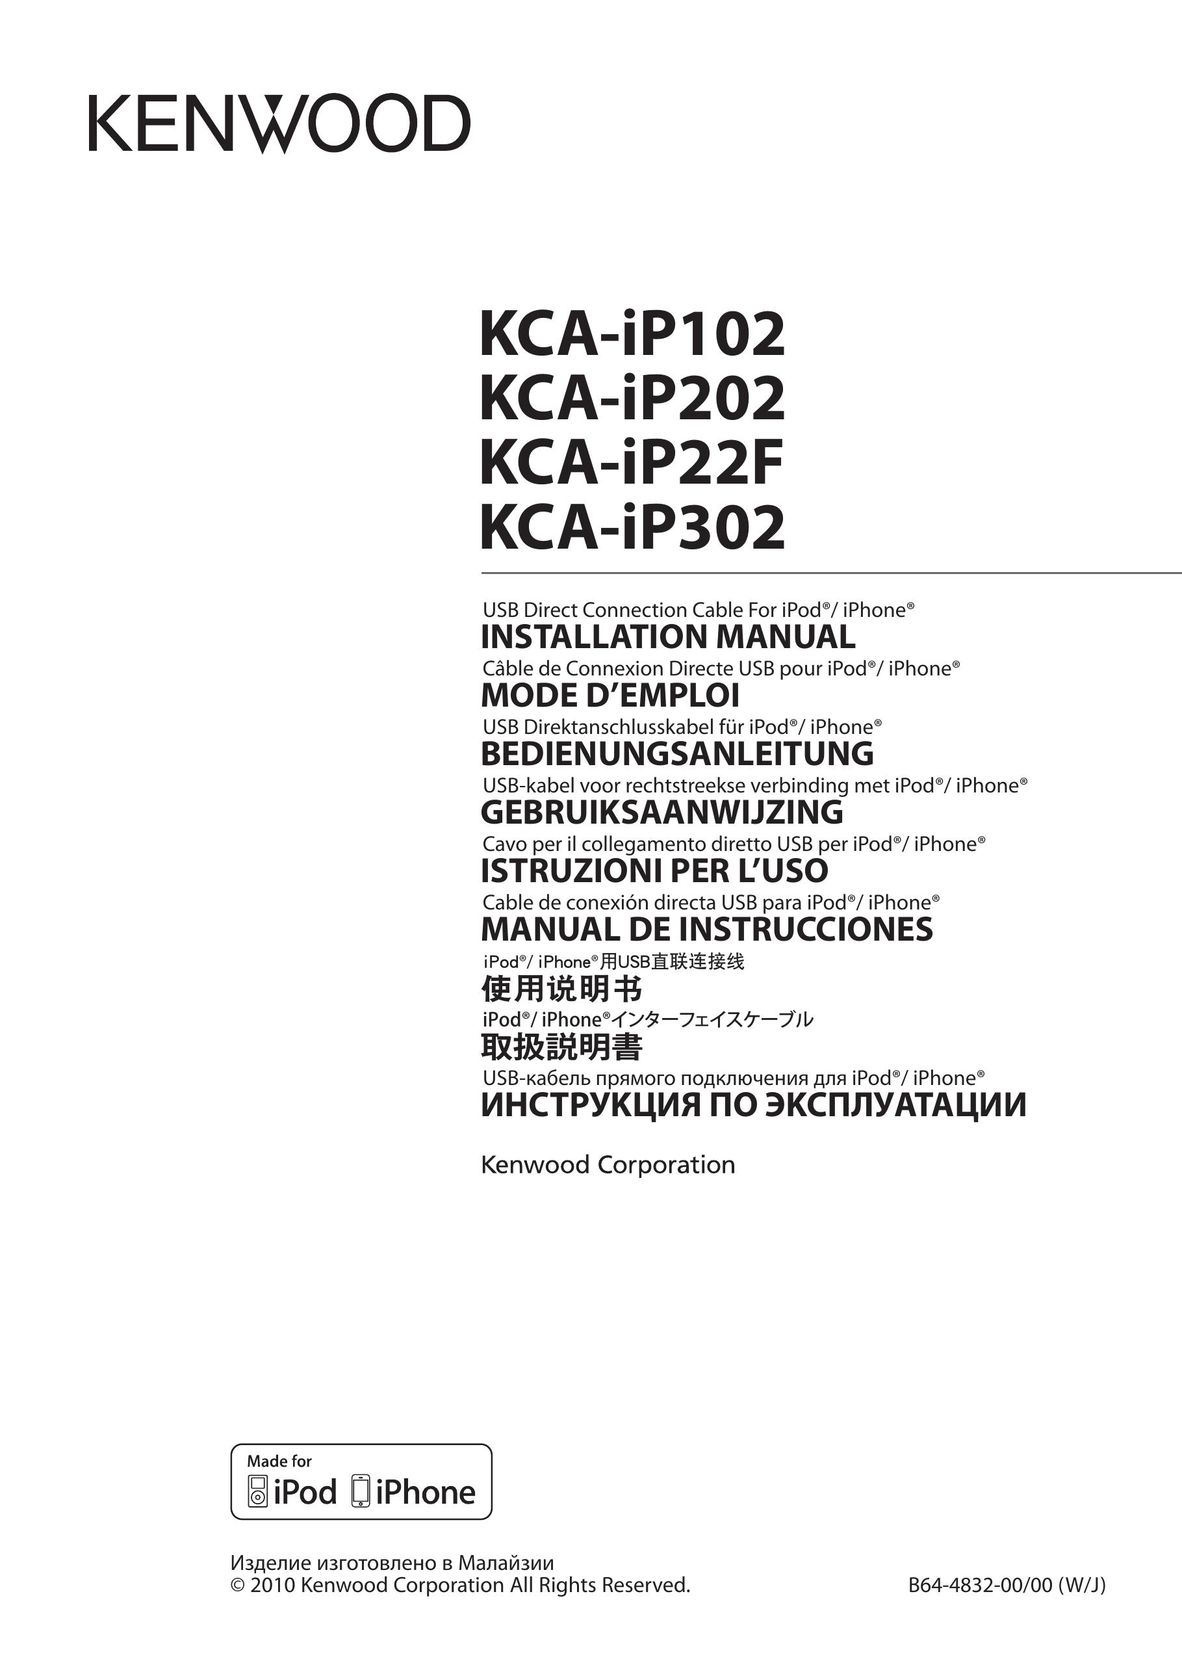 Kenwood KCA-iP202 Network Cables User Manual